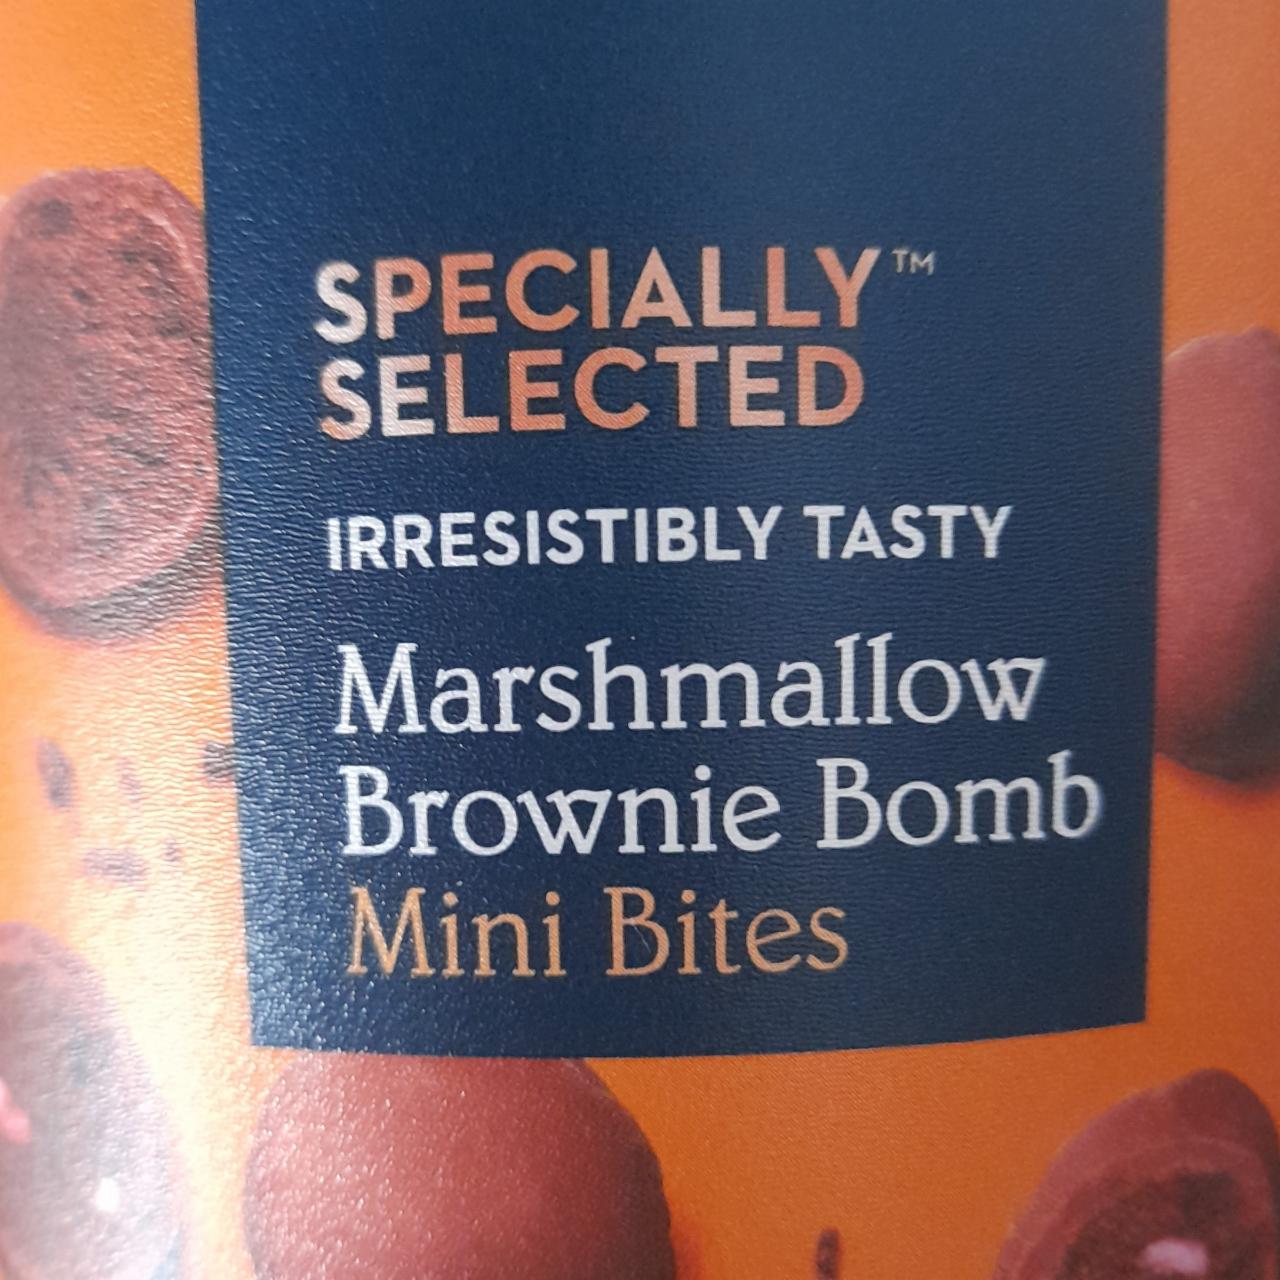 Fotografie - Marshmallow Brownie Bomb Specially selected